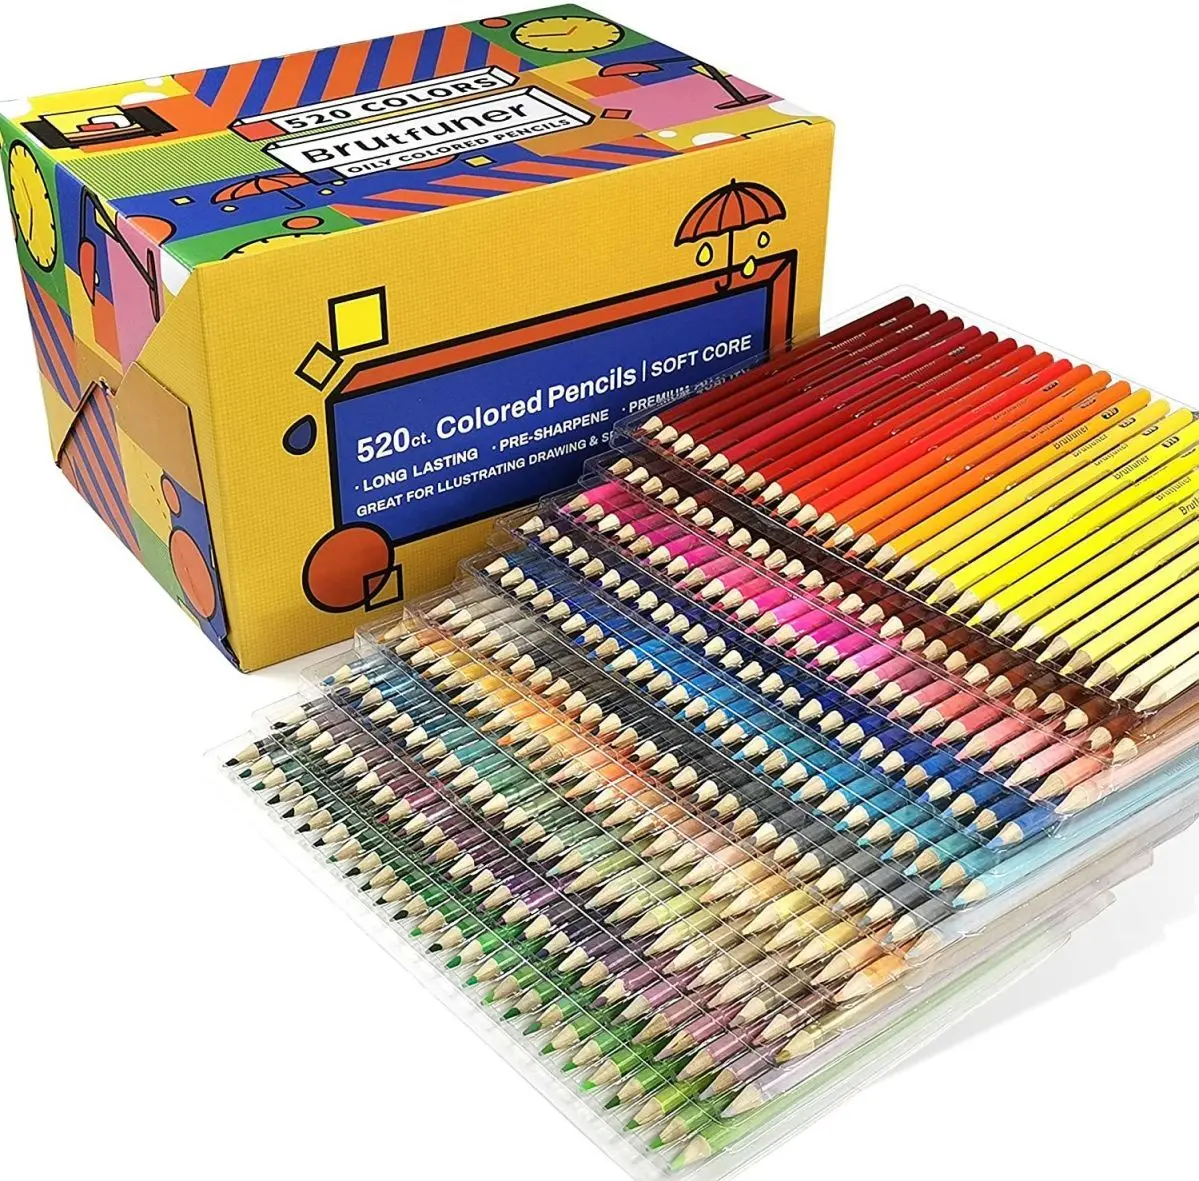 Brutfuner 520pcs Oil Colored Pencils Drawing Pencil Set Soft Sketch Color Pencil Gift Box For Children Painting Art Supplies water soluble doodle set children s paintbrush painting set watercolor pen drawing school washable colored markers art supplies